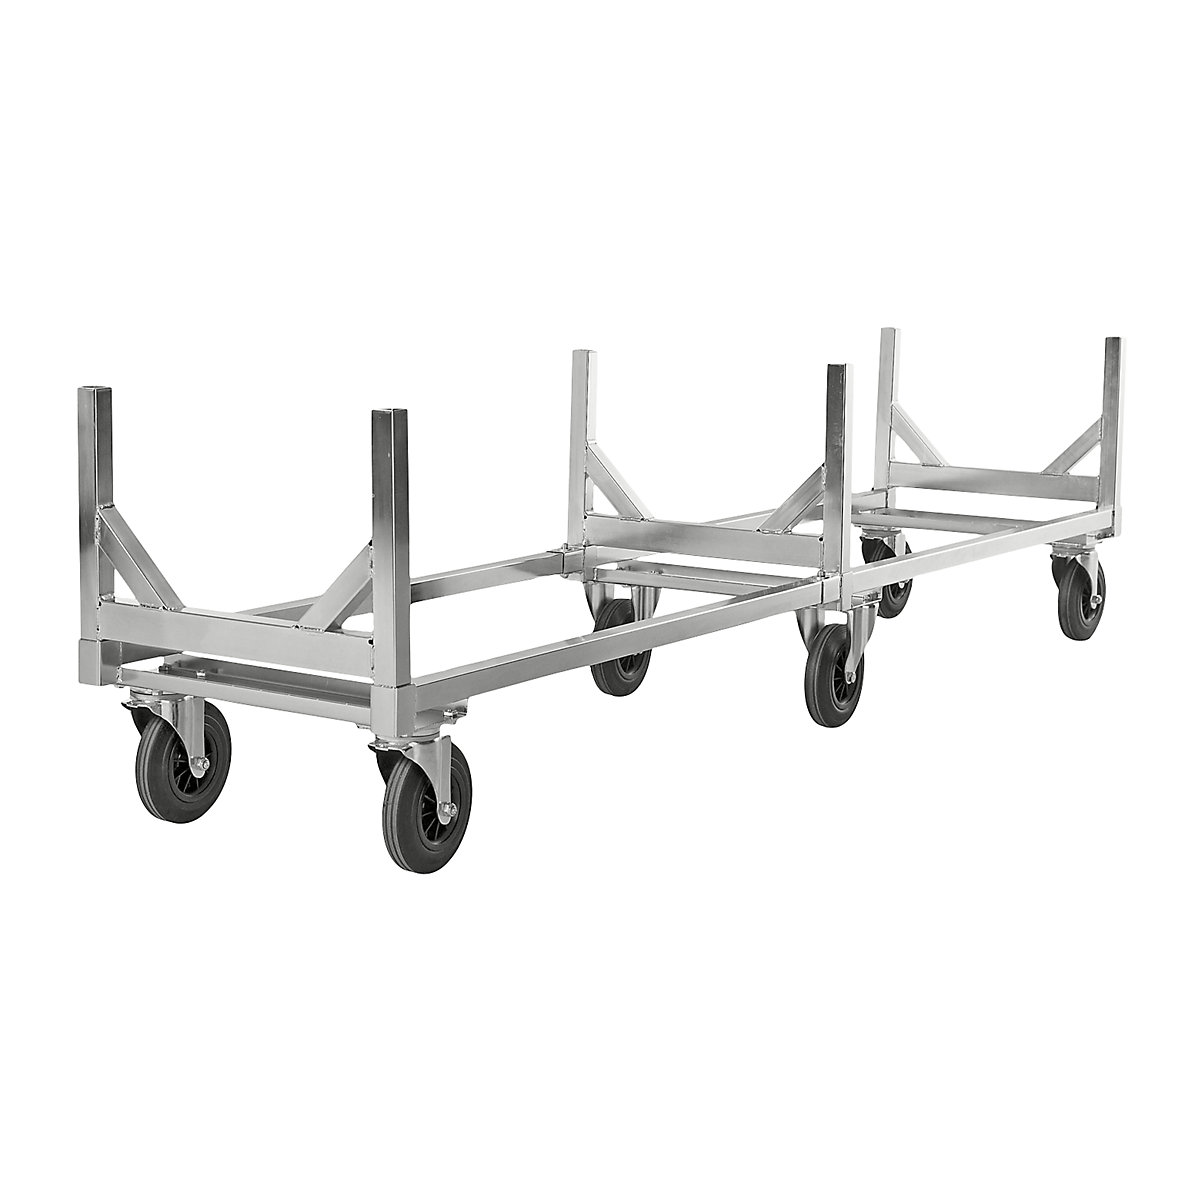 Kongamek – Professional long goods truck, max. load 800 kg, with drawbar, electrolytically zinc plated